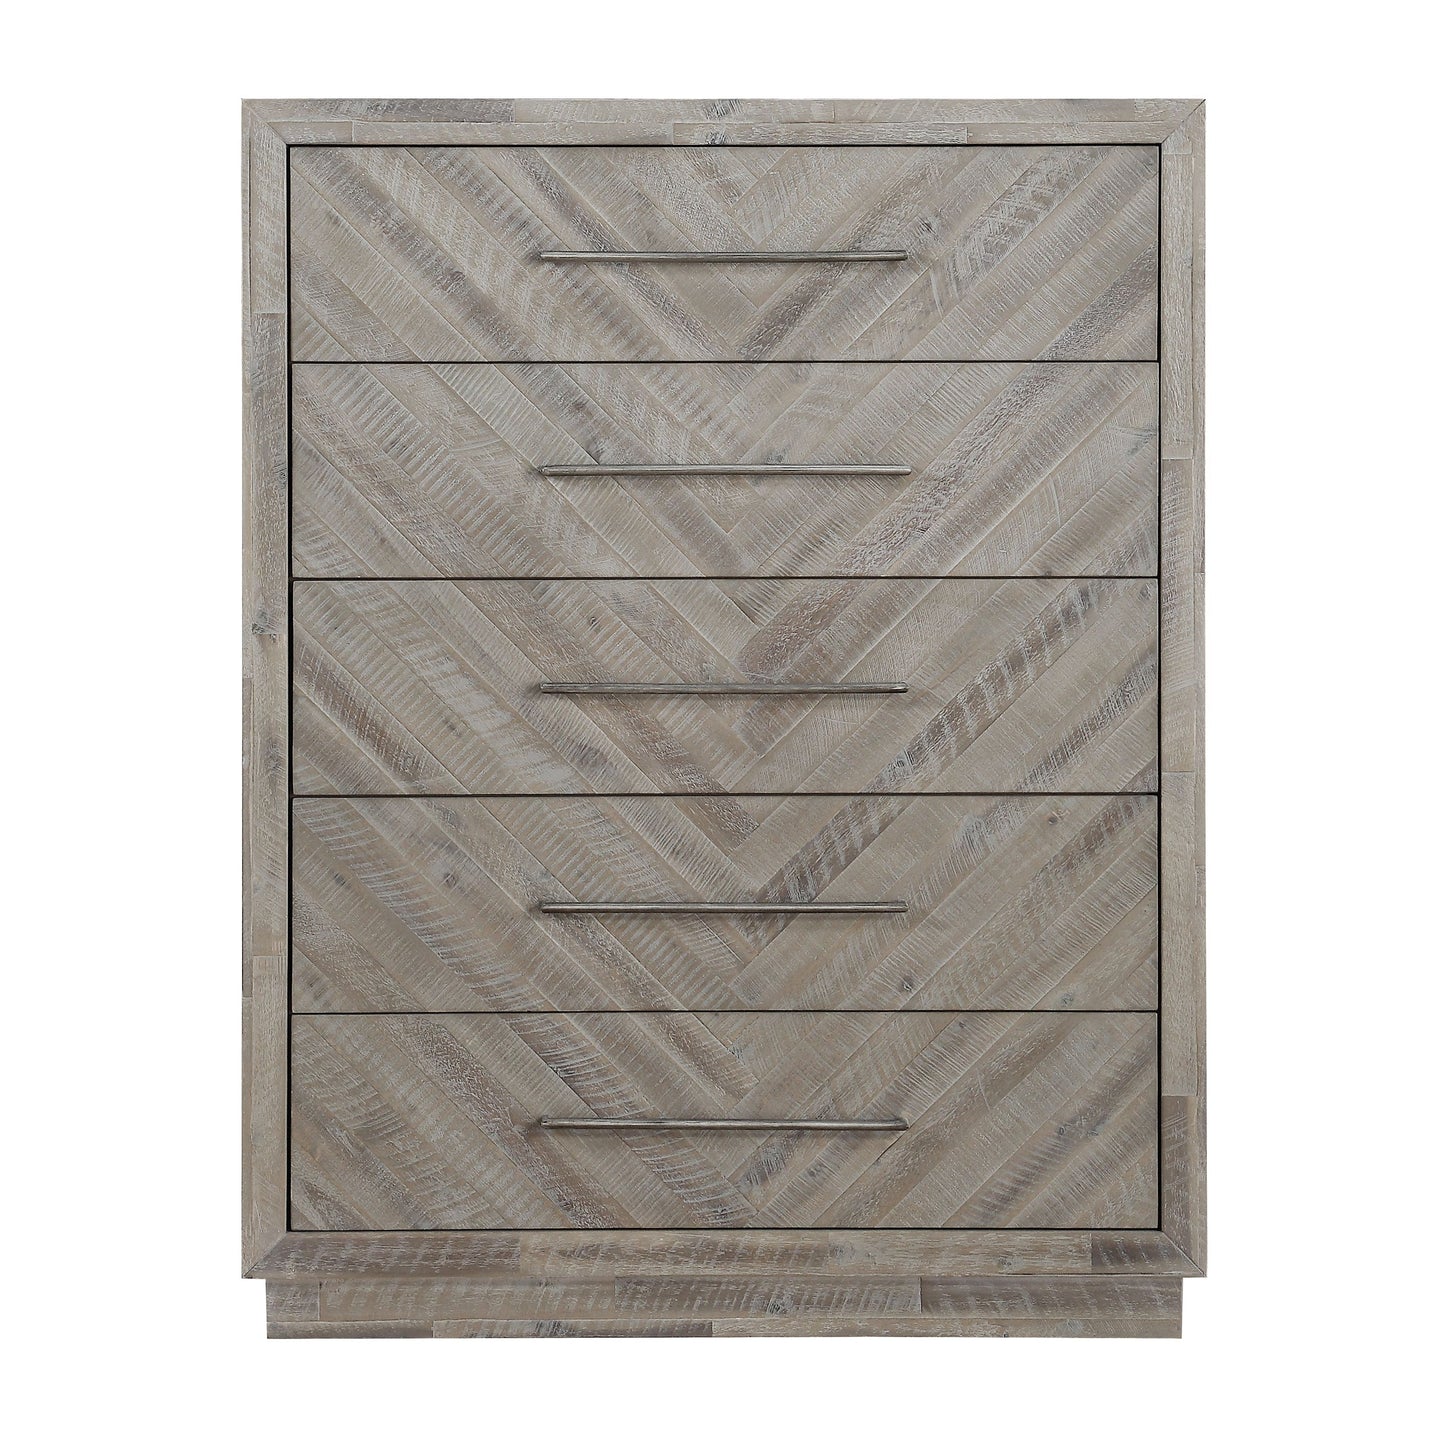 Modus Alexandra Five Drawer Chest in Rustic Latte